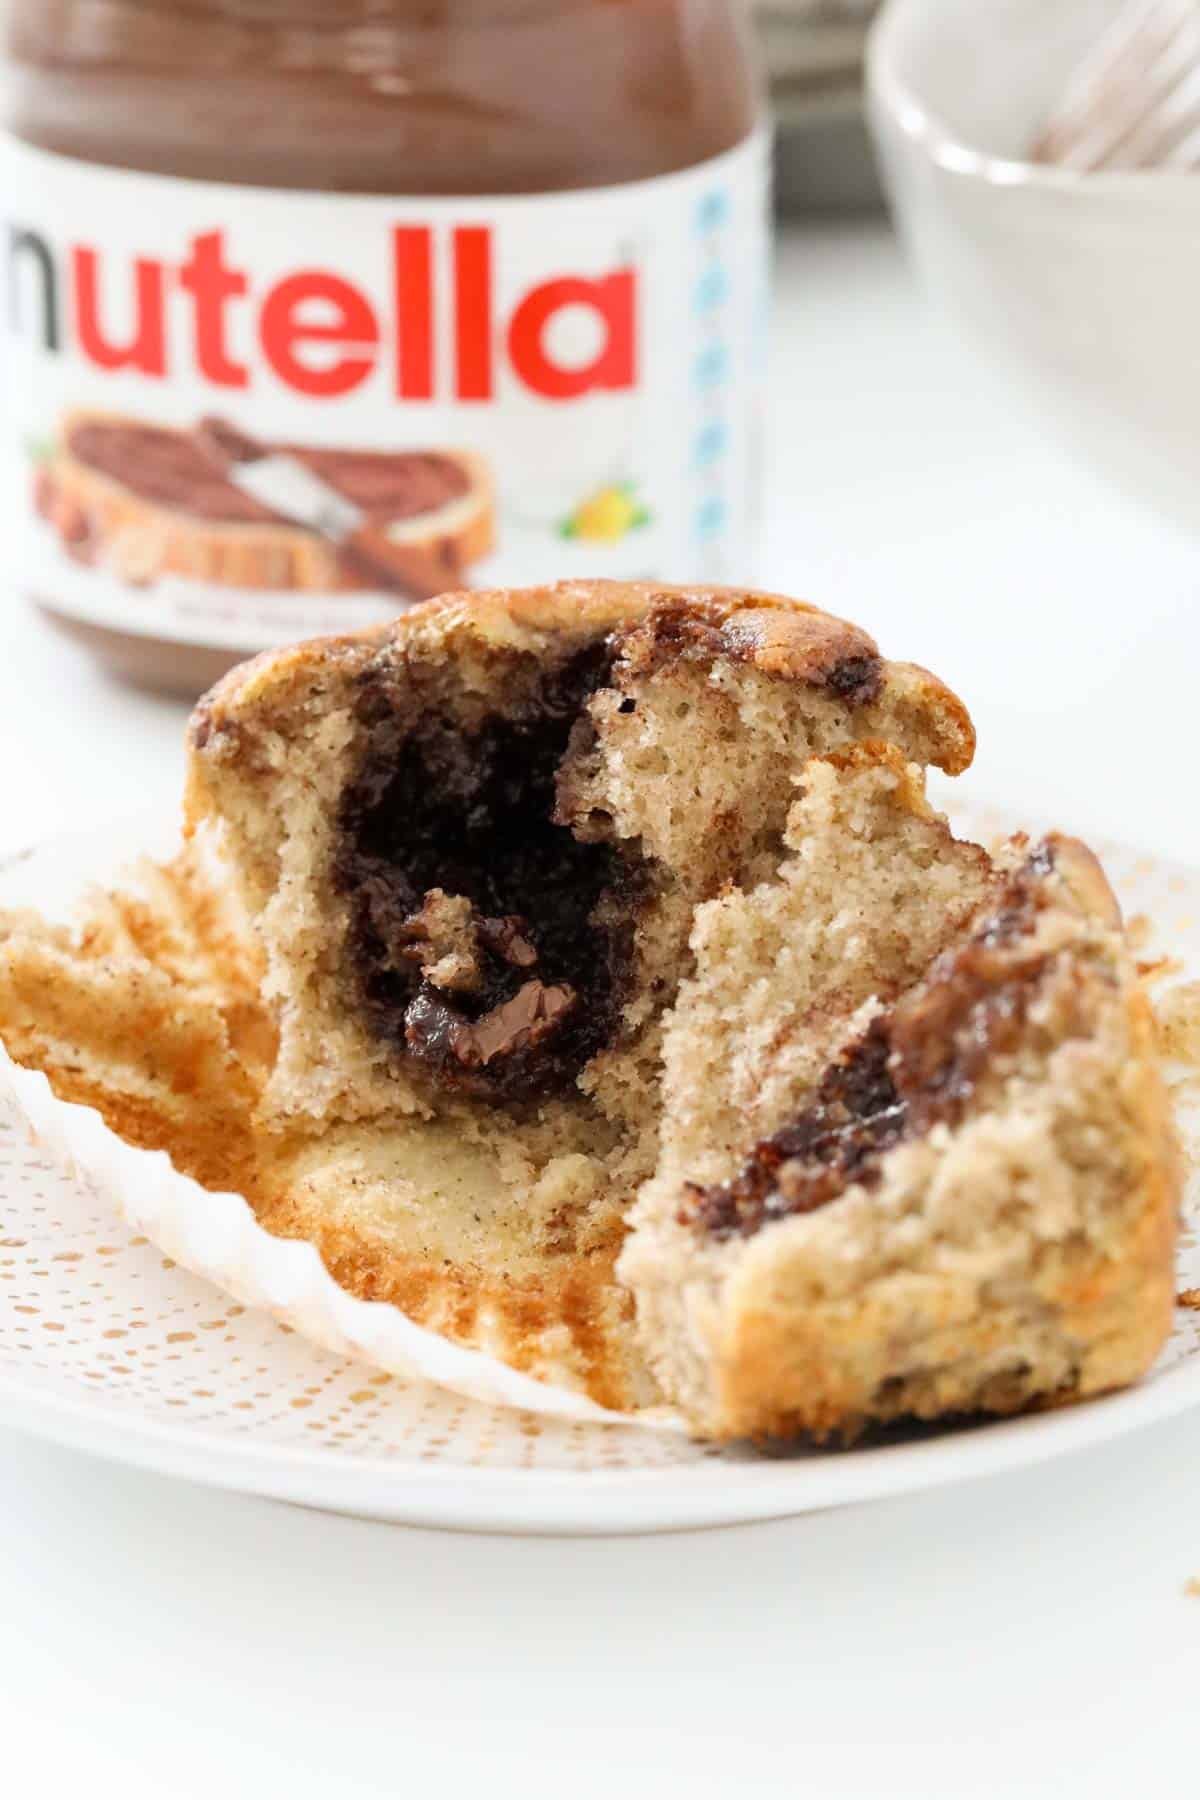 A banana and Nutella muffin split in two to show the swirls of Nutella.